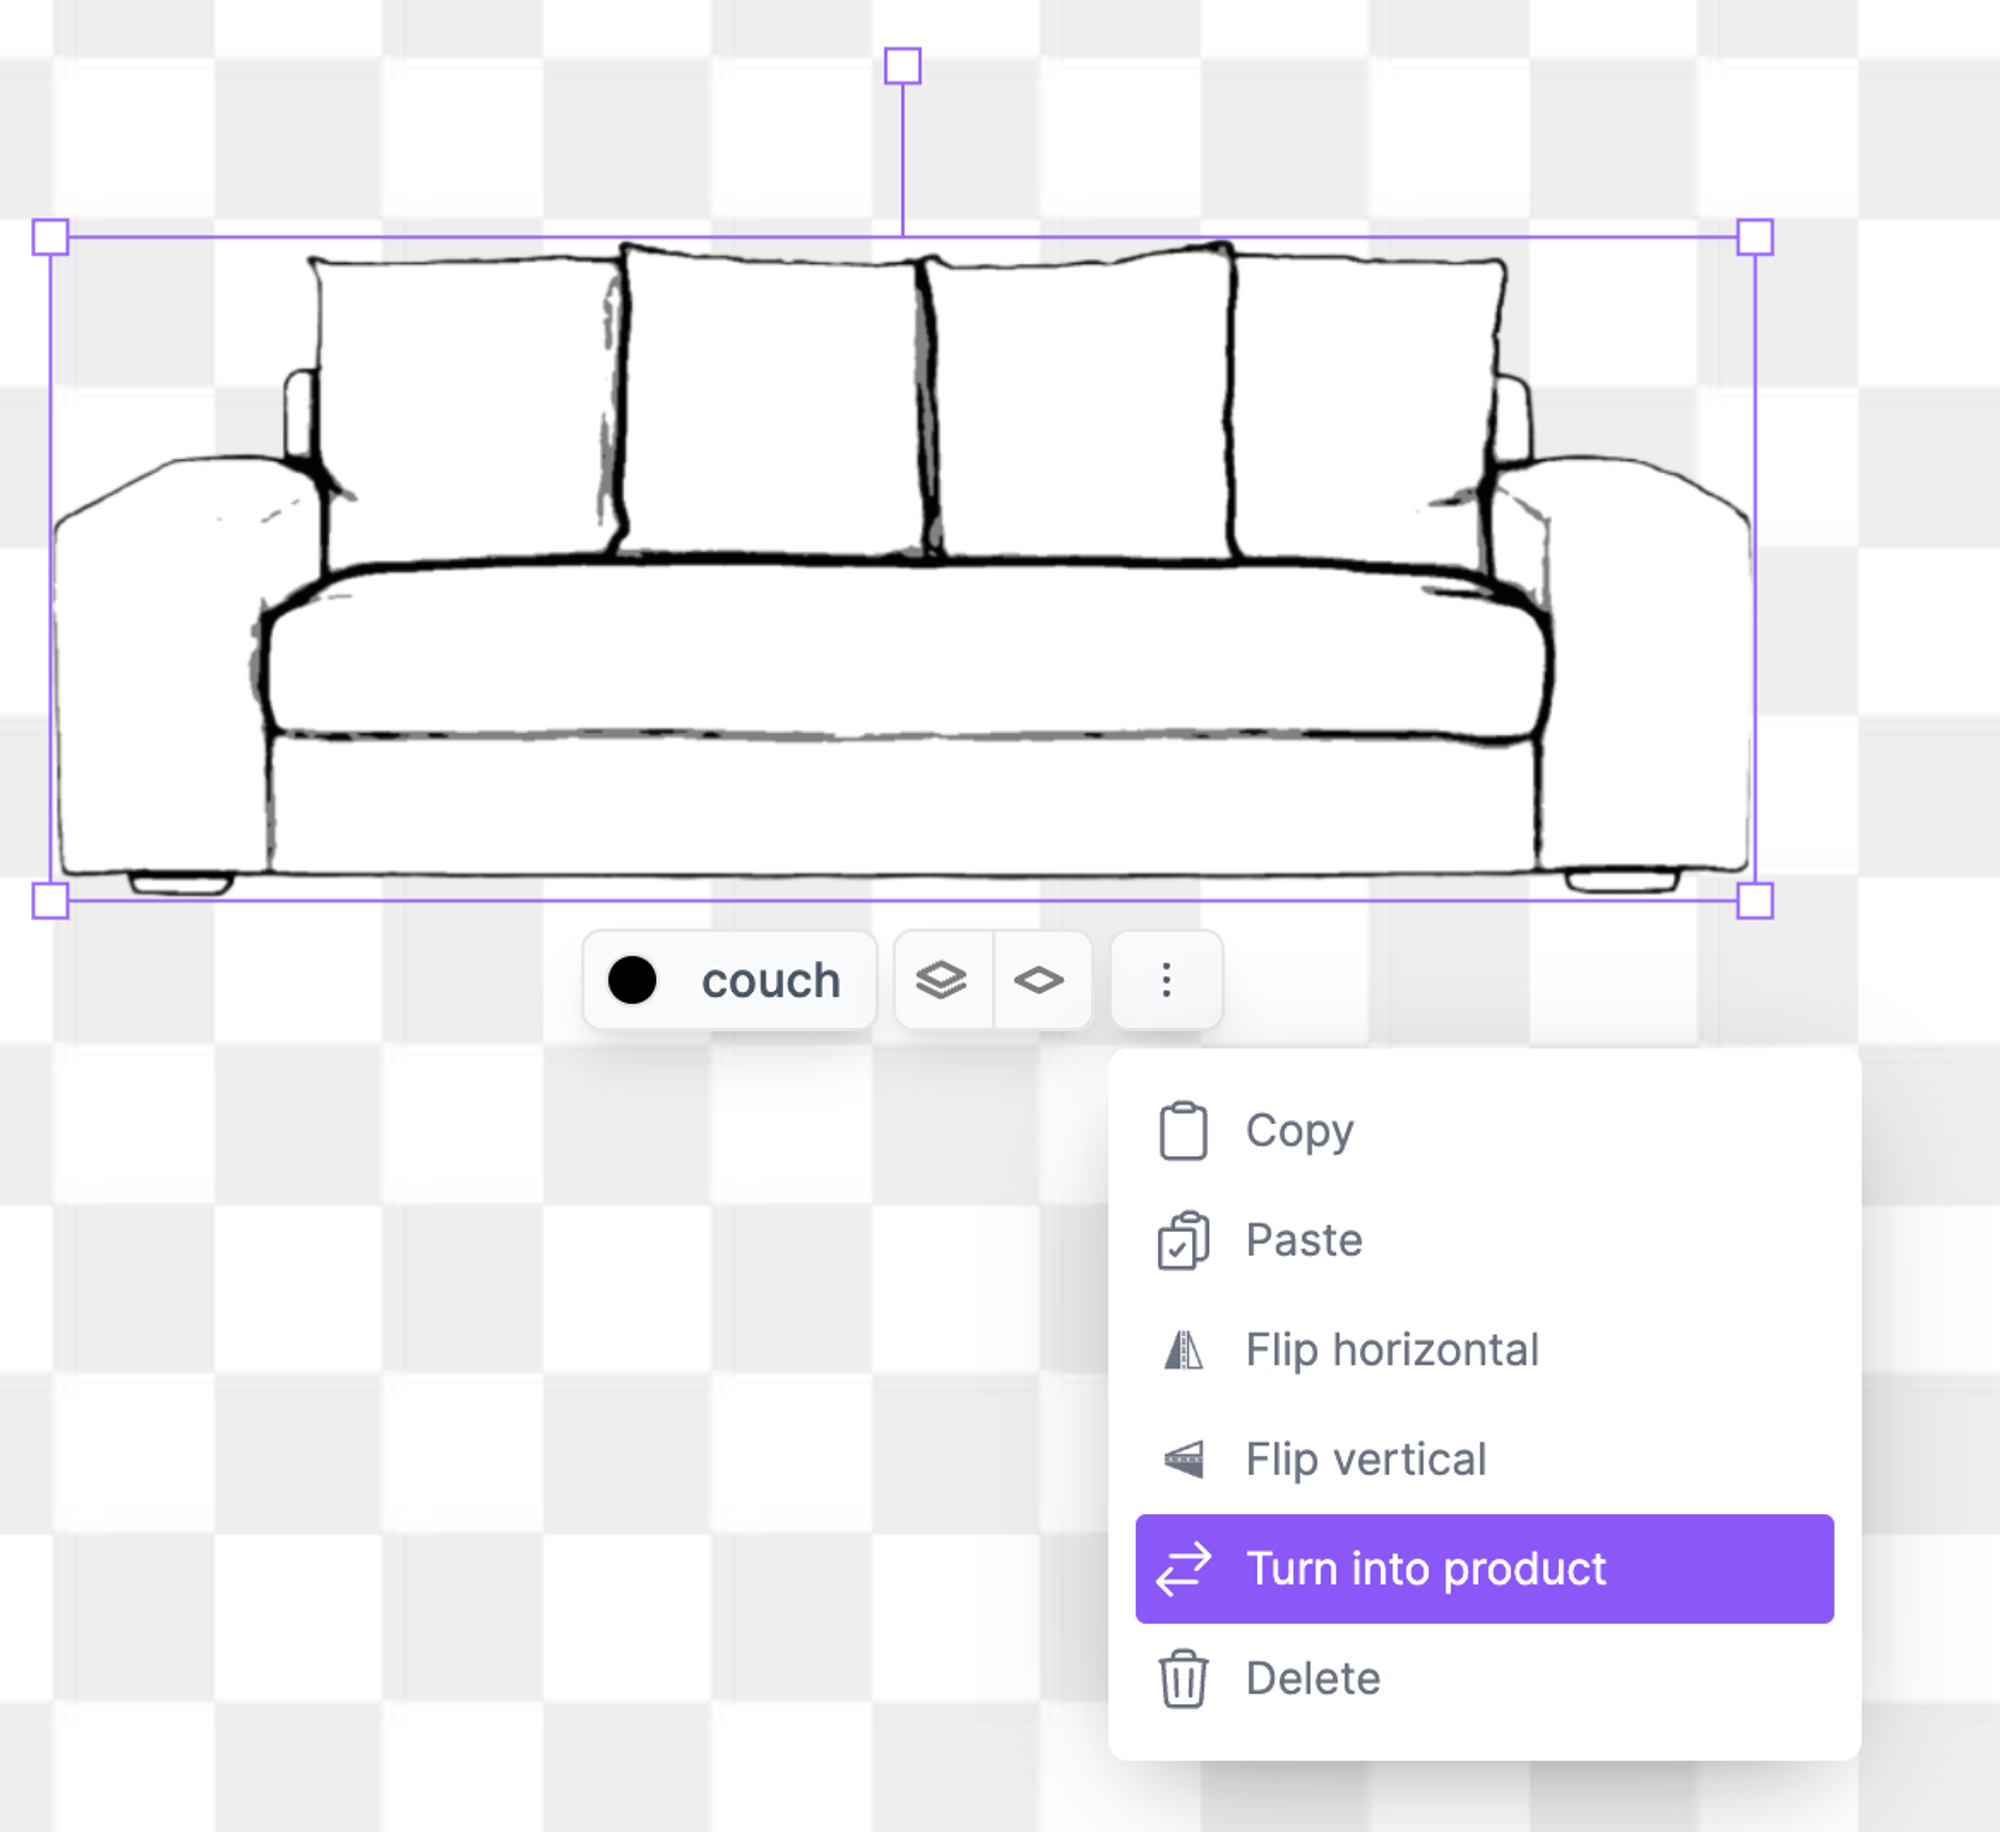 This will generate images with A couch, that roughly has the indicated shape but can be of any color, lit or even tilted.